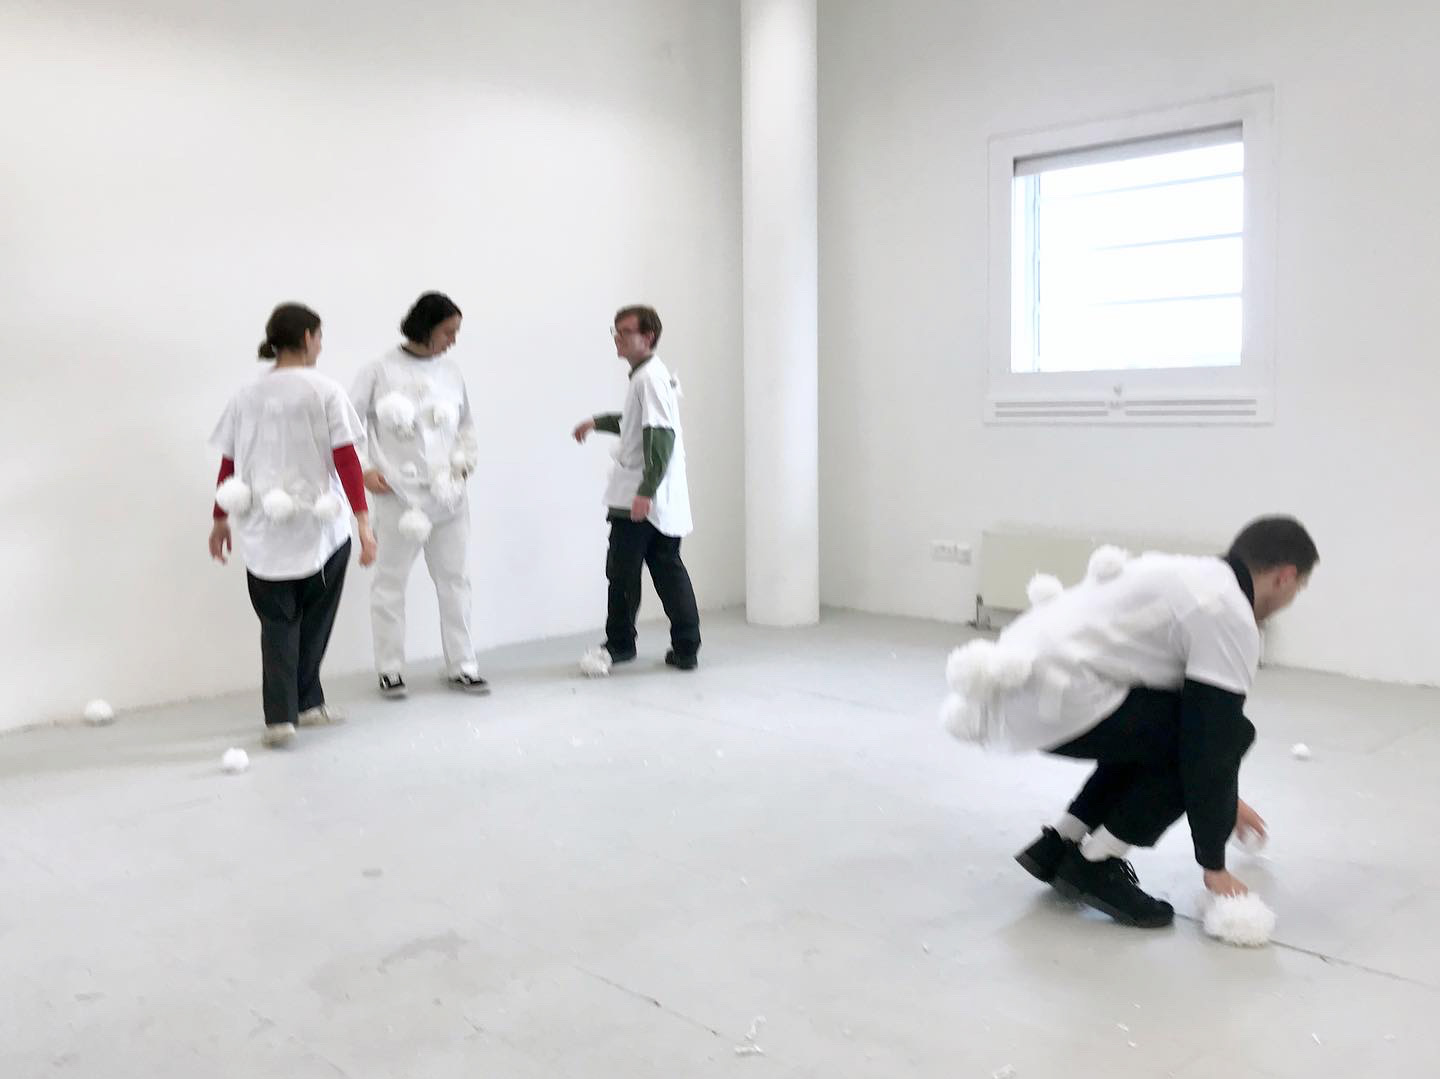 An image of several people participating in a snowball fight with wooden balls, by wearing white, velcro t-shirts, in a grey room.